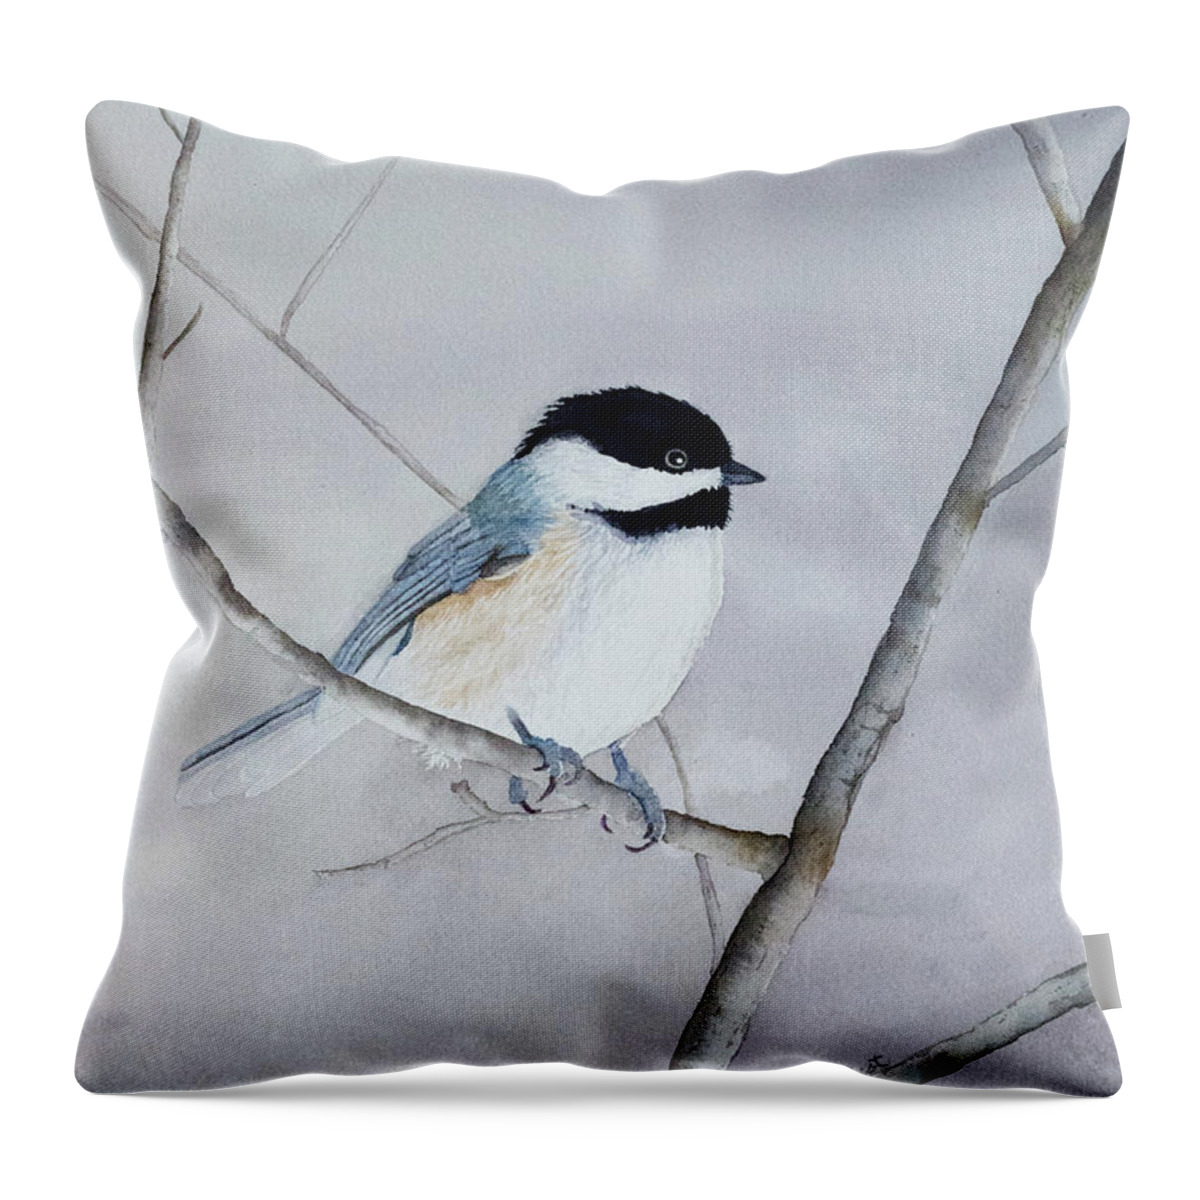 Chickadee Throw Pillow featuring the painting Chickadee II by Laurel Best